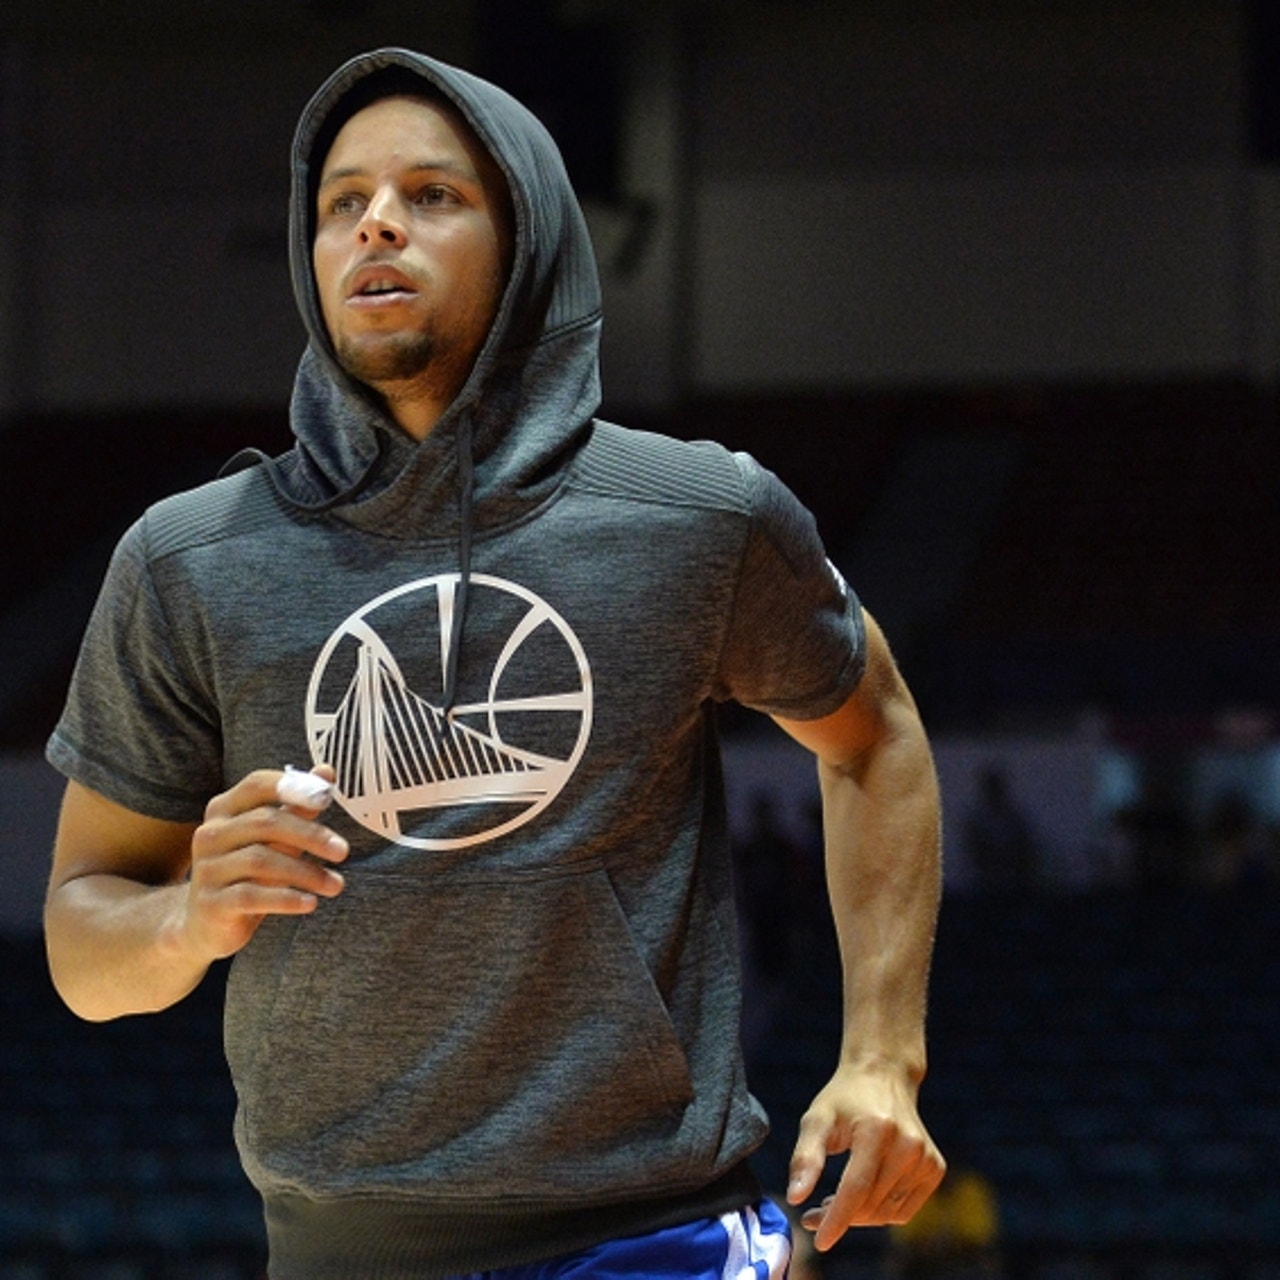 TRENDING: Steph Curry Unveils New Limitless Golf Apparel